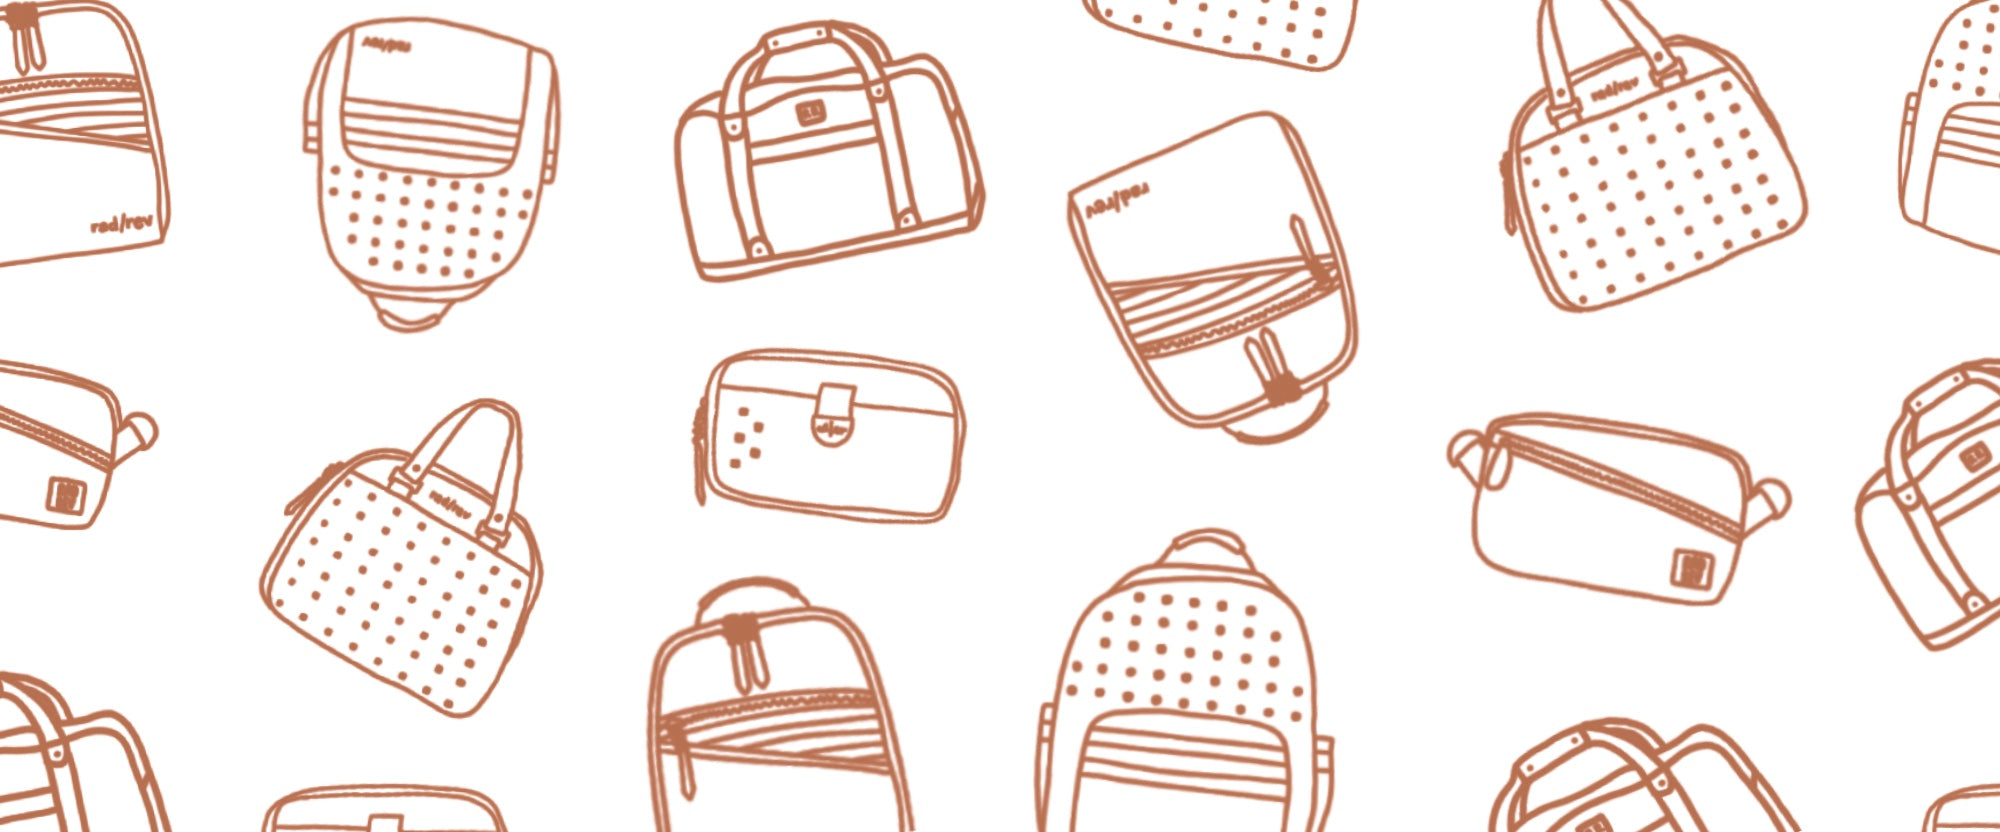 Sketch of different bags collage